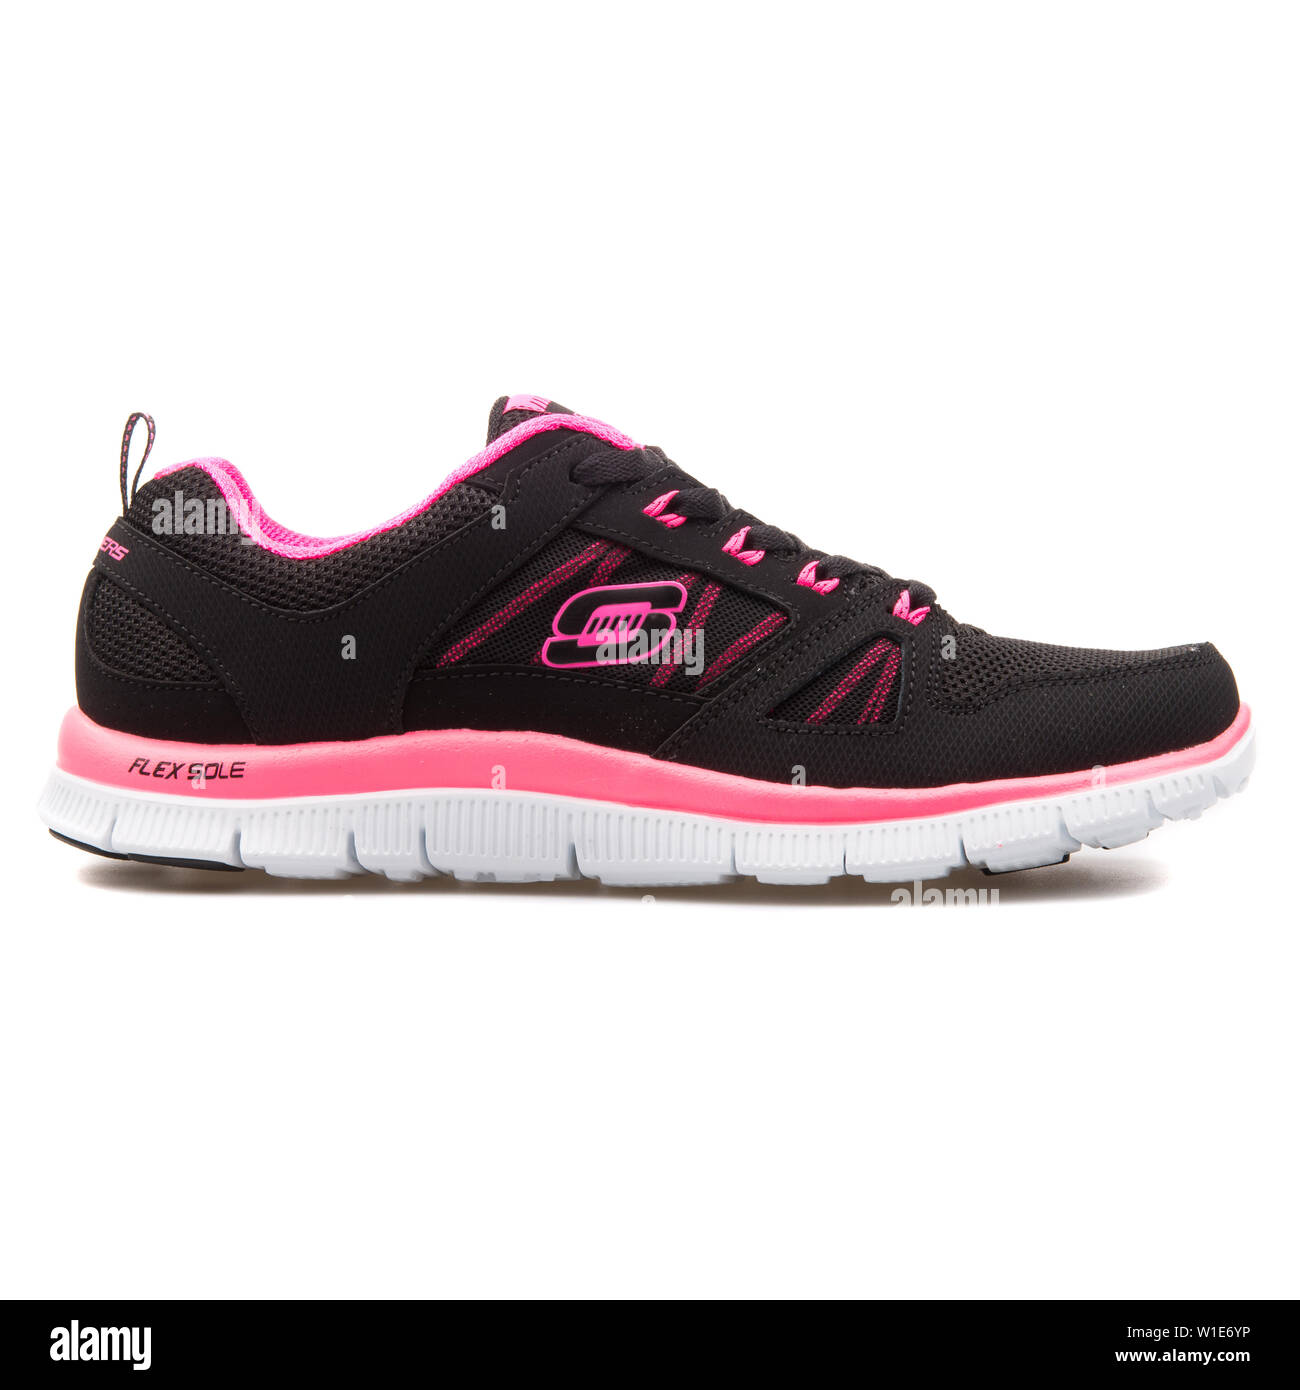 VIENNA, AUSTRIA - AUGUST 25, 2017: Skechers Flex Appeal Spring Fever black  and pink sneaker on white background Stock Photo - Alamy